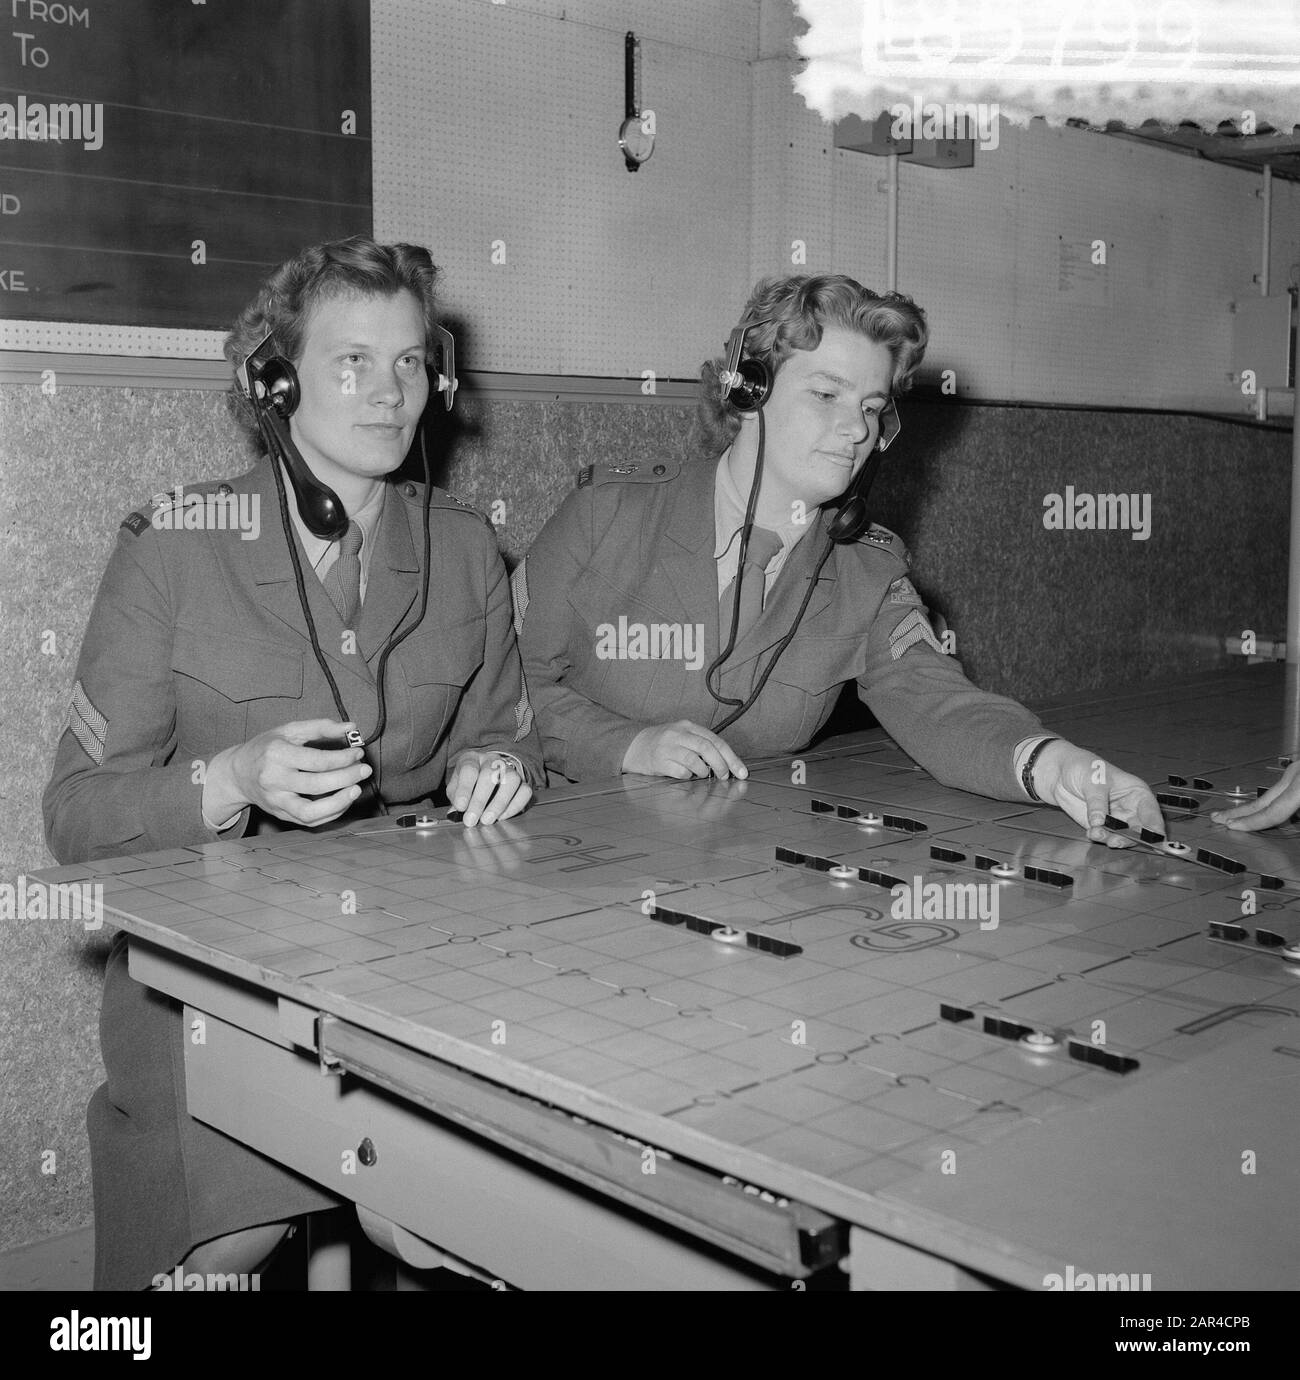 Reserve Milva in The Hague. Command Central Command Air Target Artillery Date: 12 May 1957 Location: Den Haag, Zuid-Holland Keywords: army, soldiers, women Stock Photo